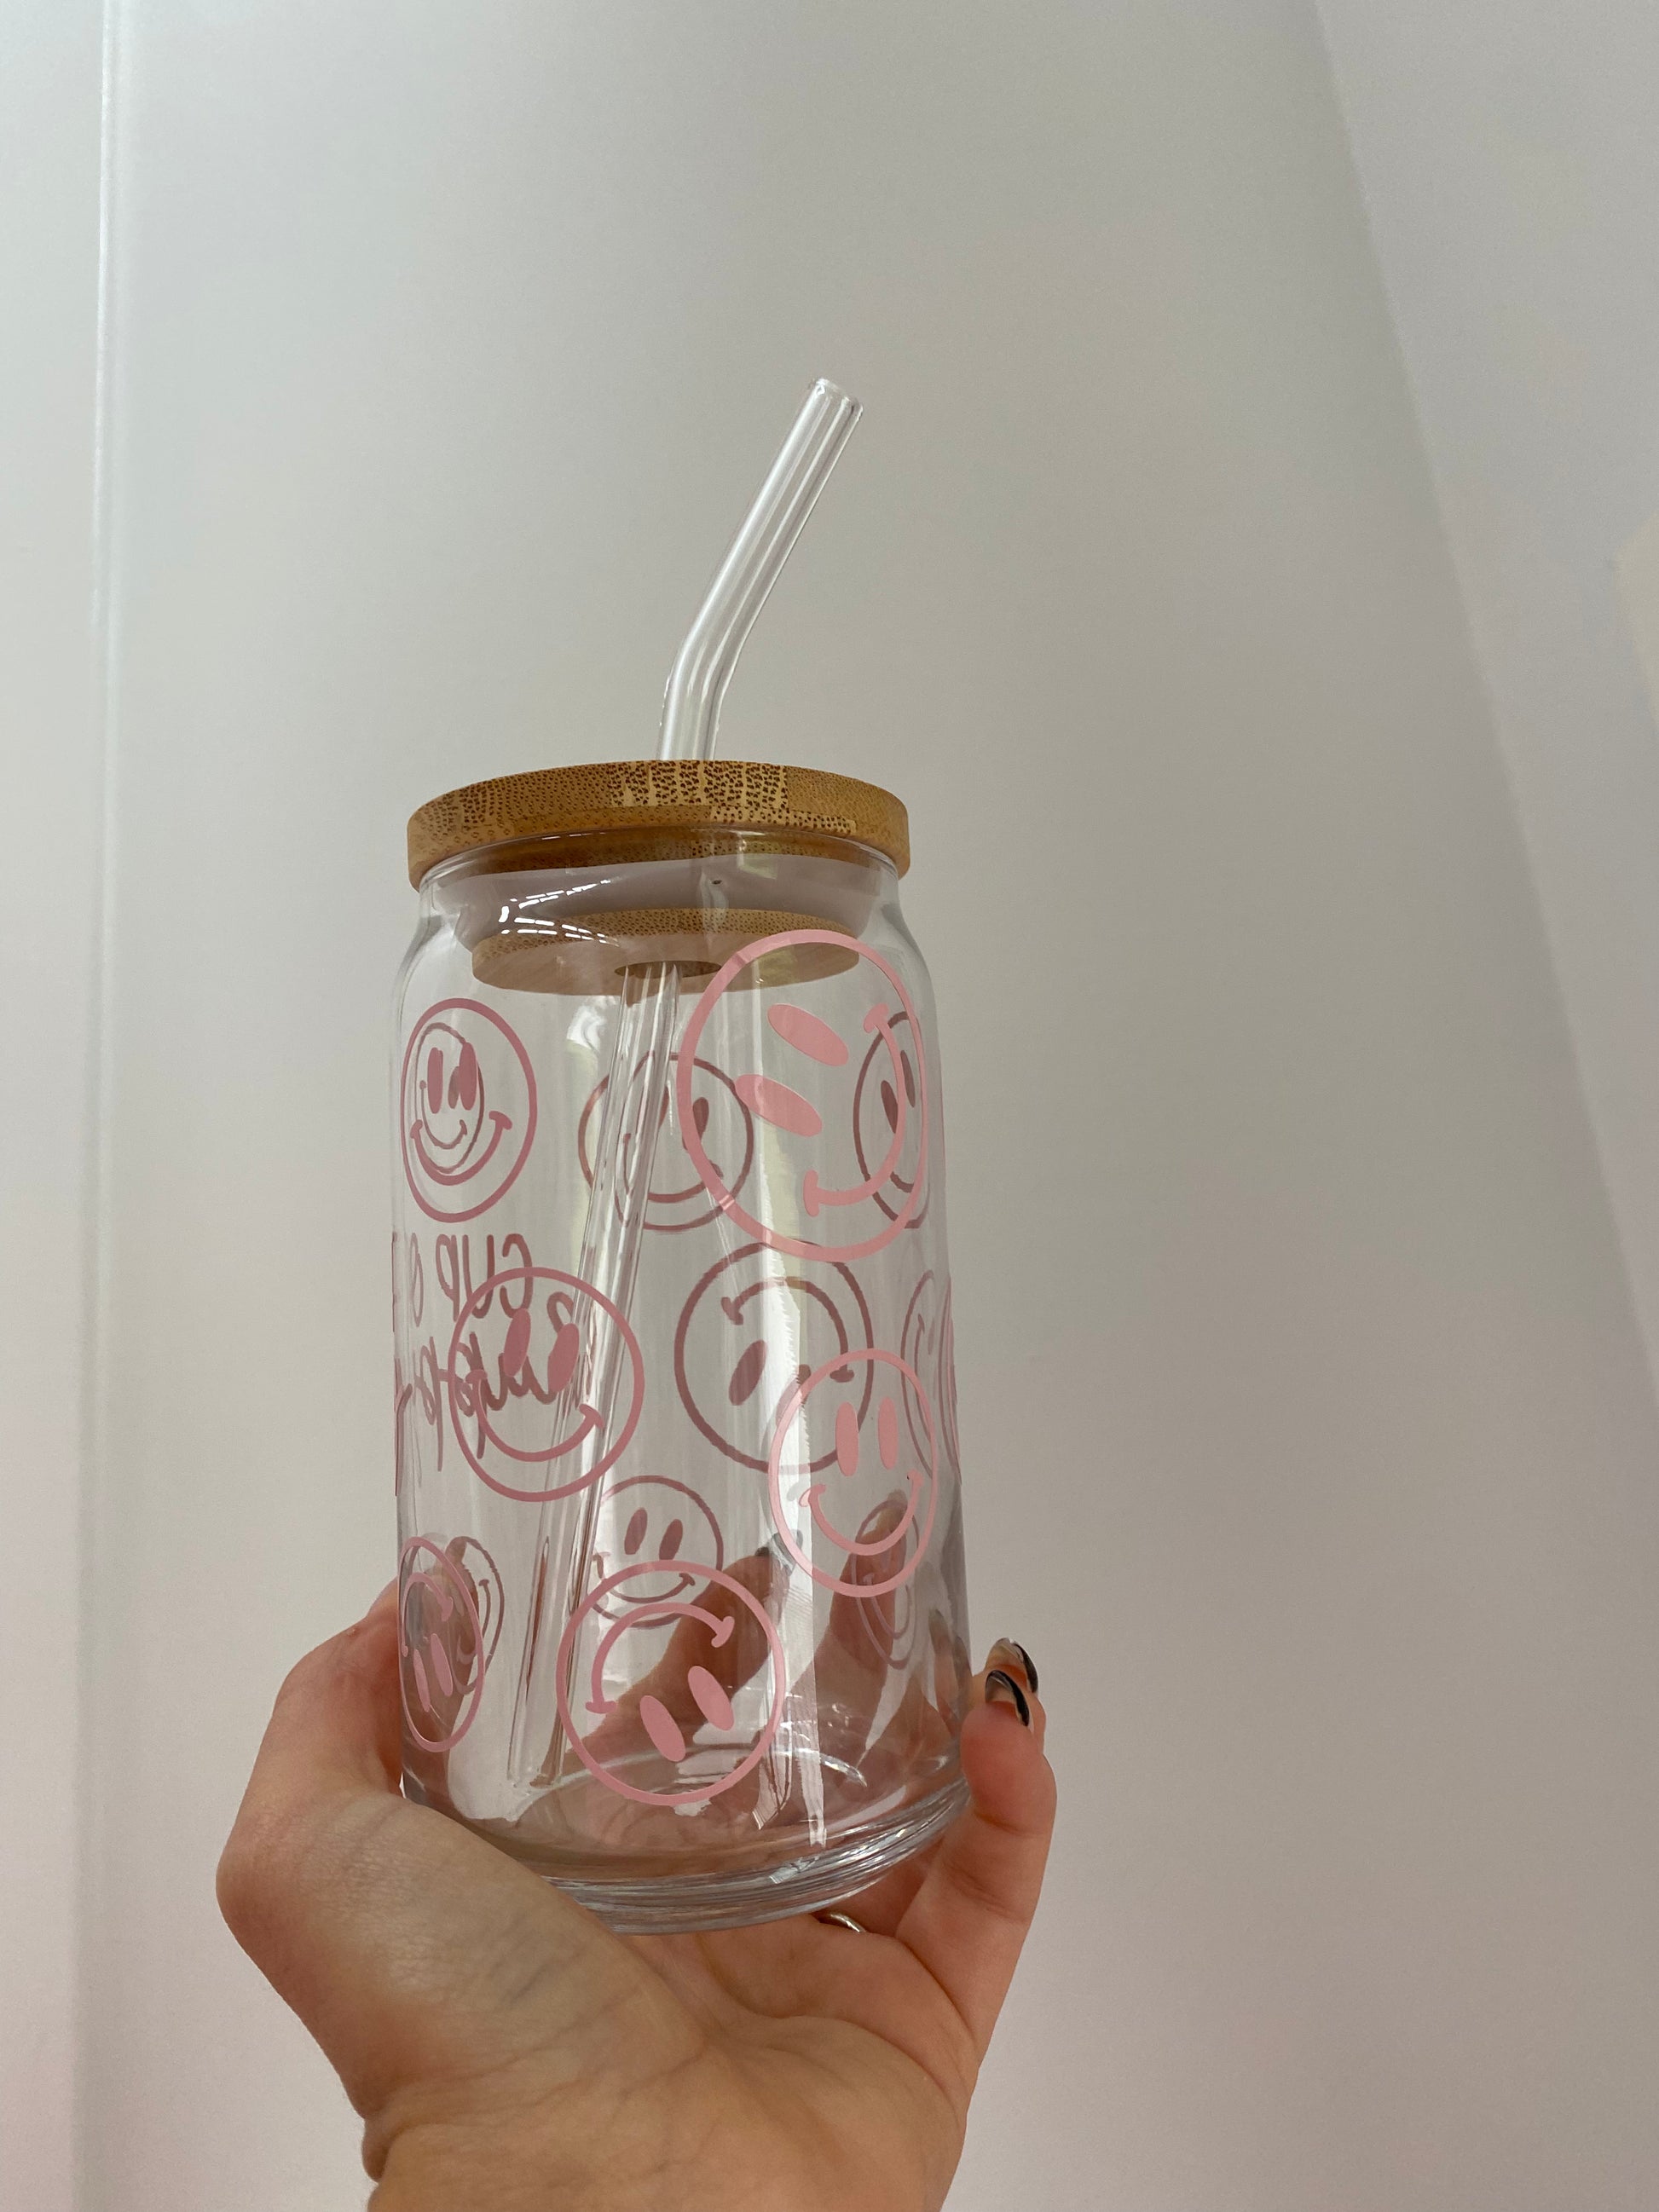 White Cup of Happy Smiley Iced Coffee Glass – The Pink Edition